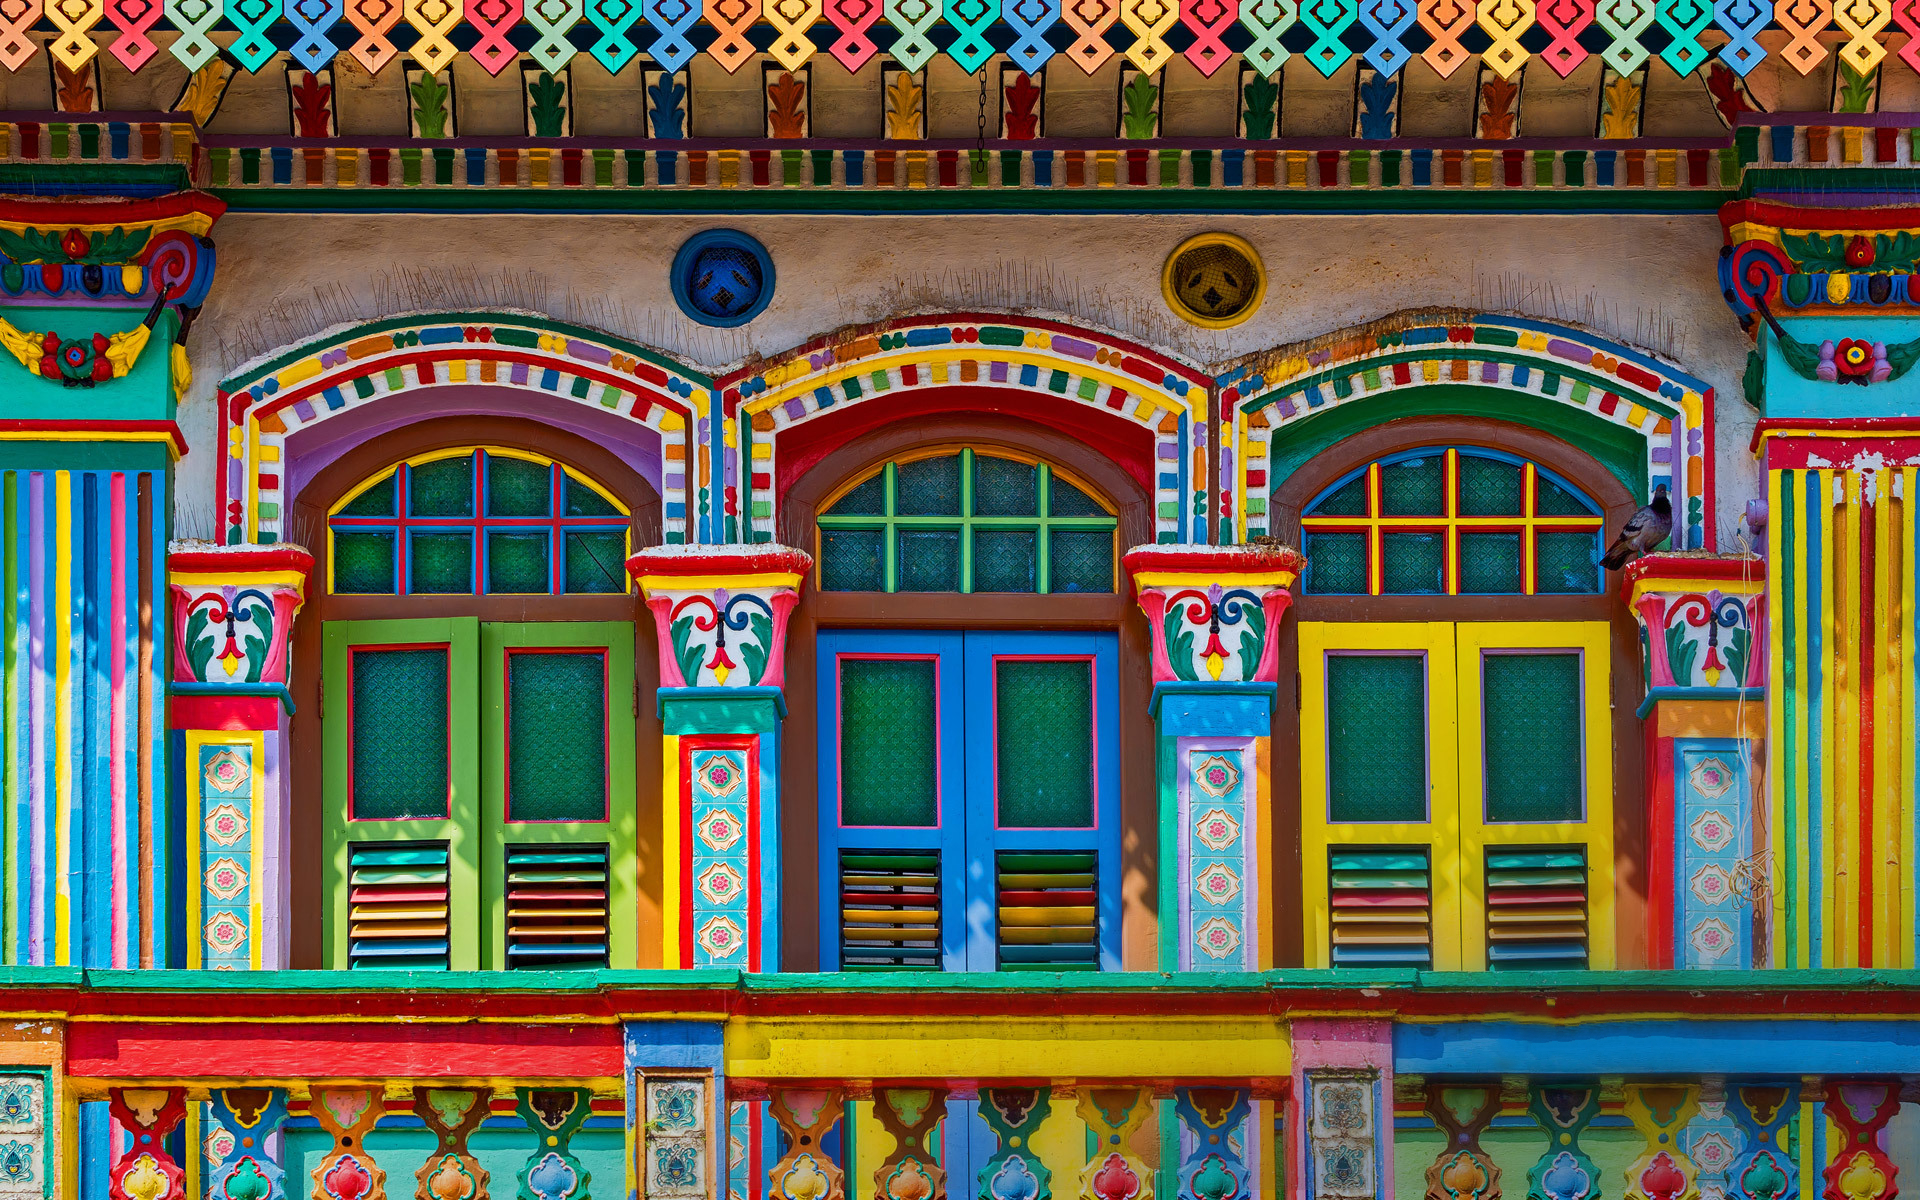 india, man made, building, colorful, colors, facade Full HD